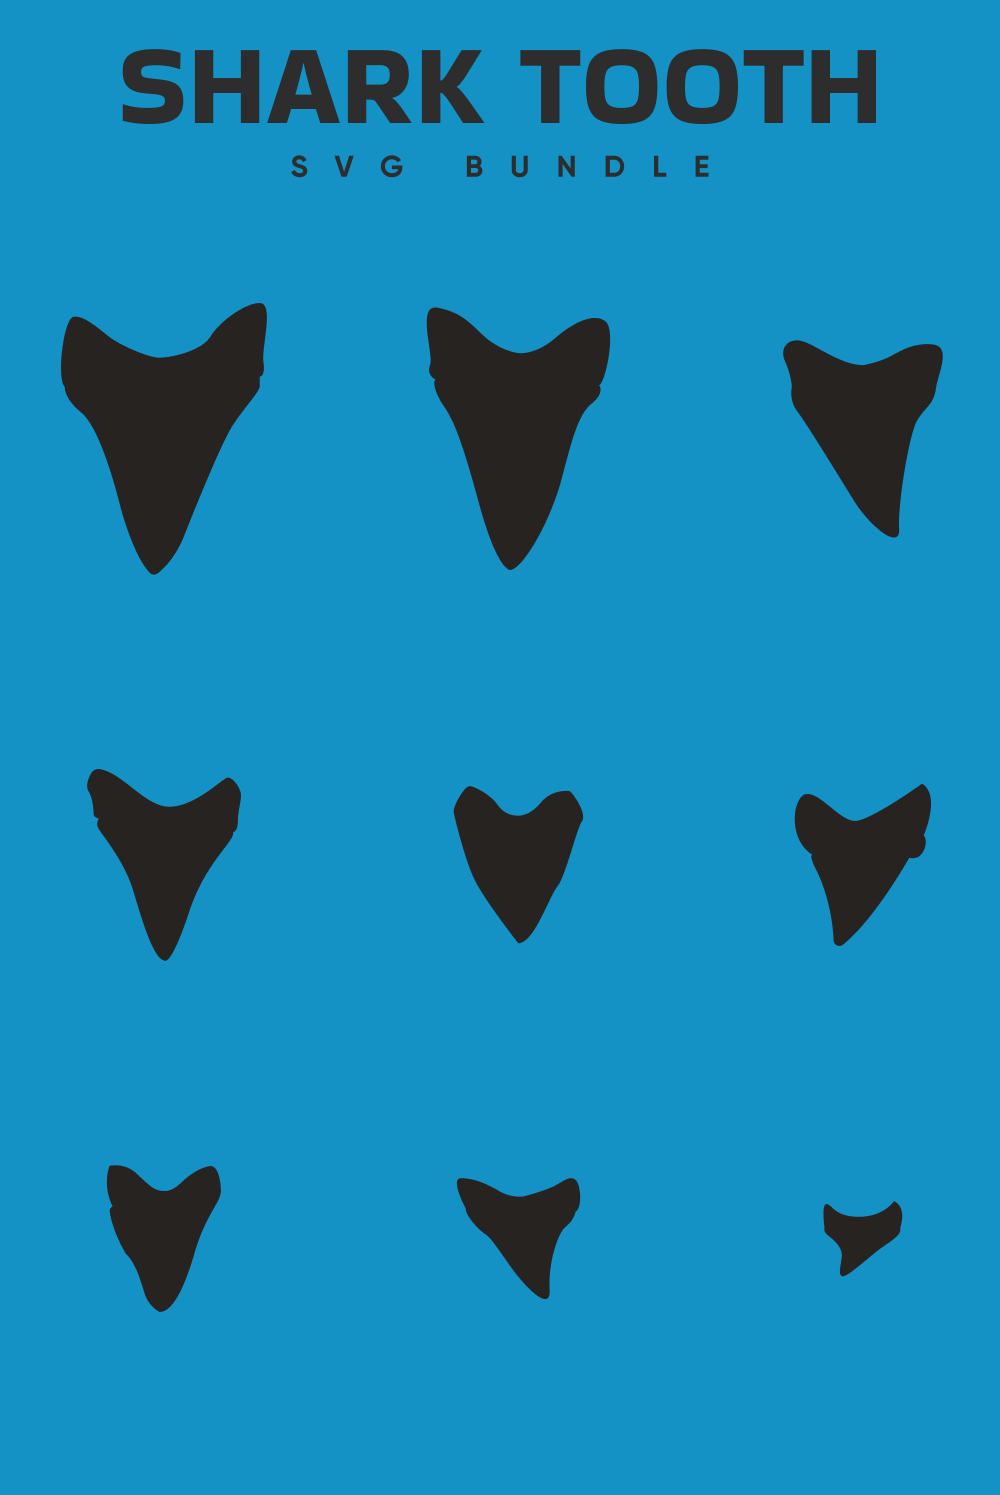 Nine black shark teeth from large to small on a blue background with a product title.